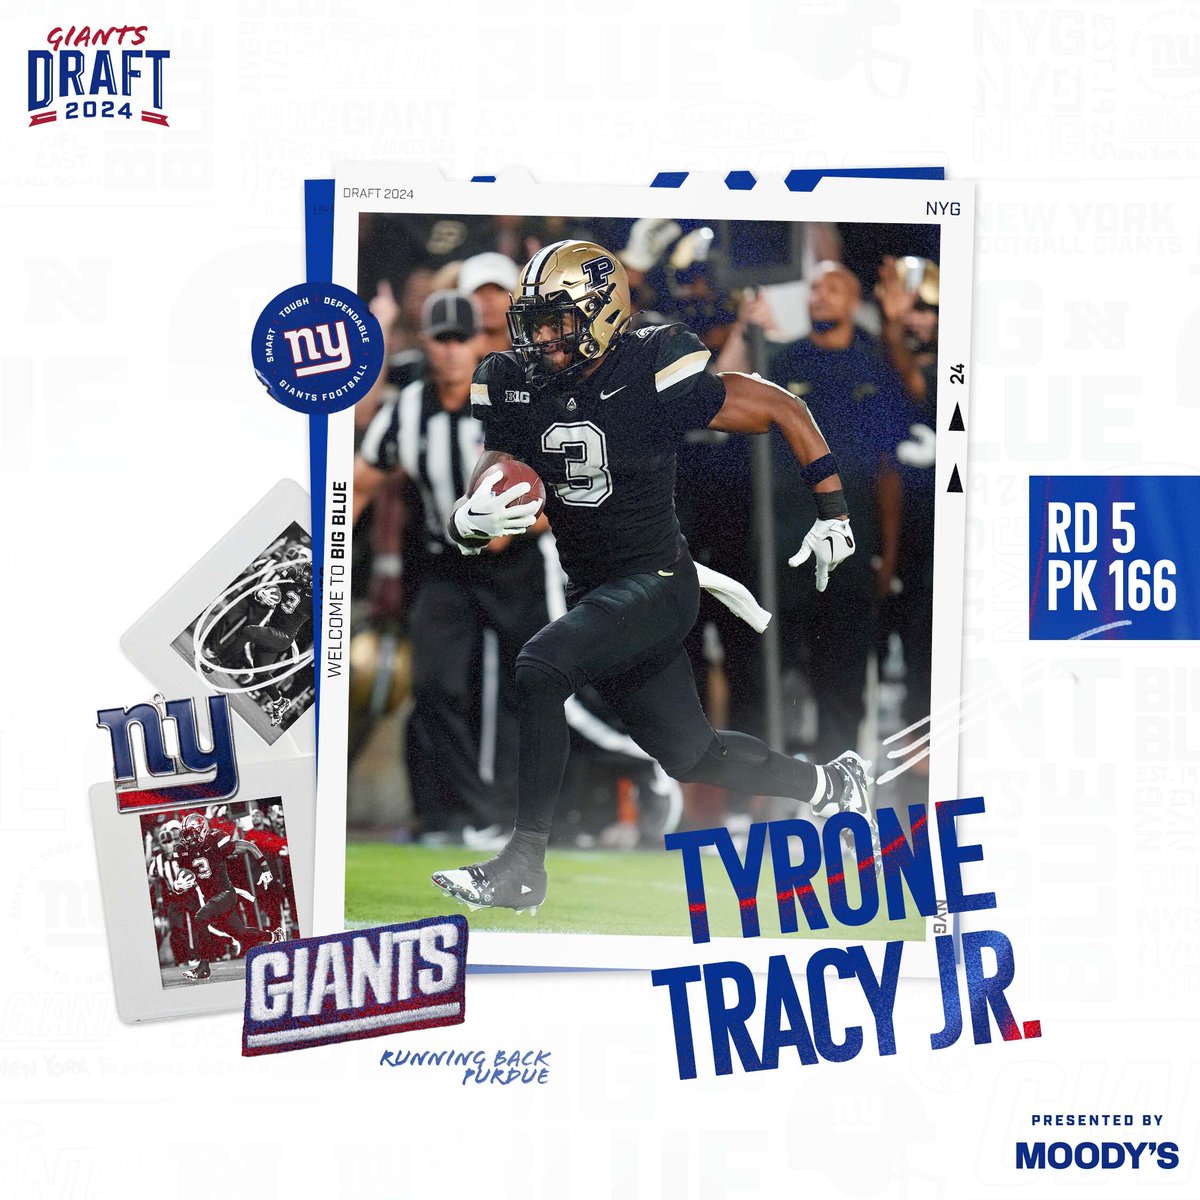 Welcome to the squad, Tyrone Tracy Jr. 📰: nygnt.co/24dr5